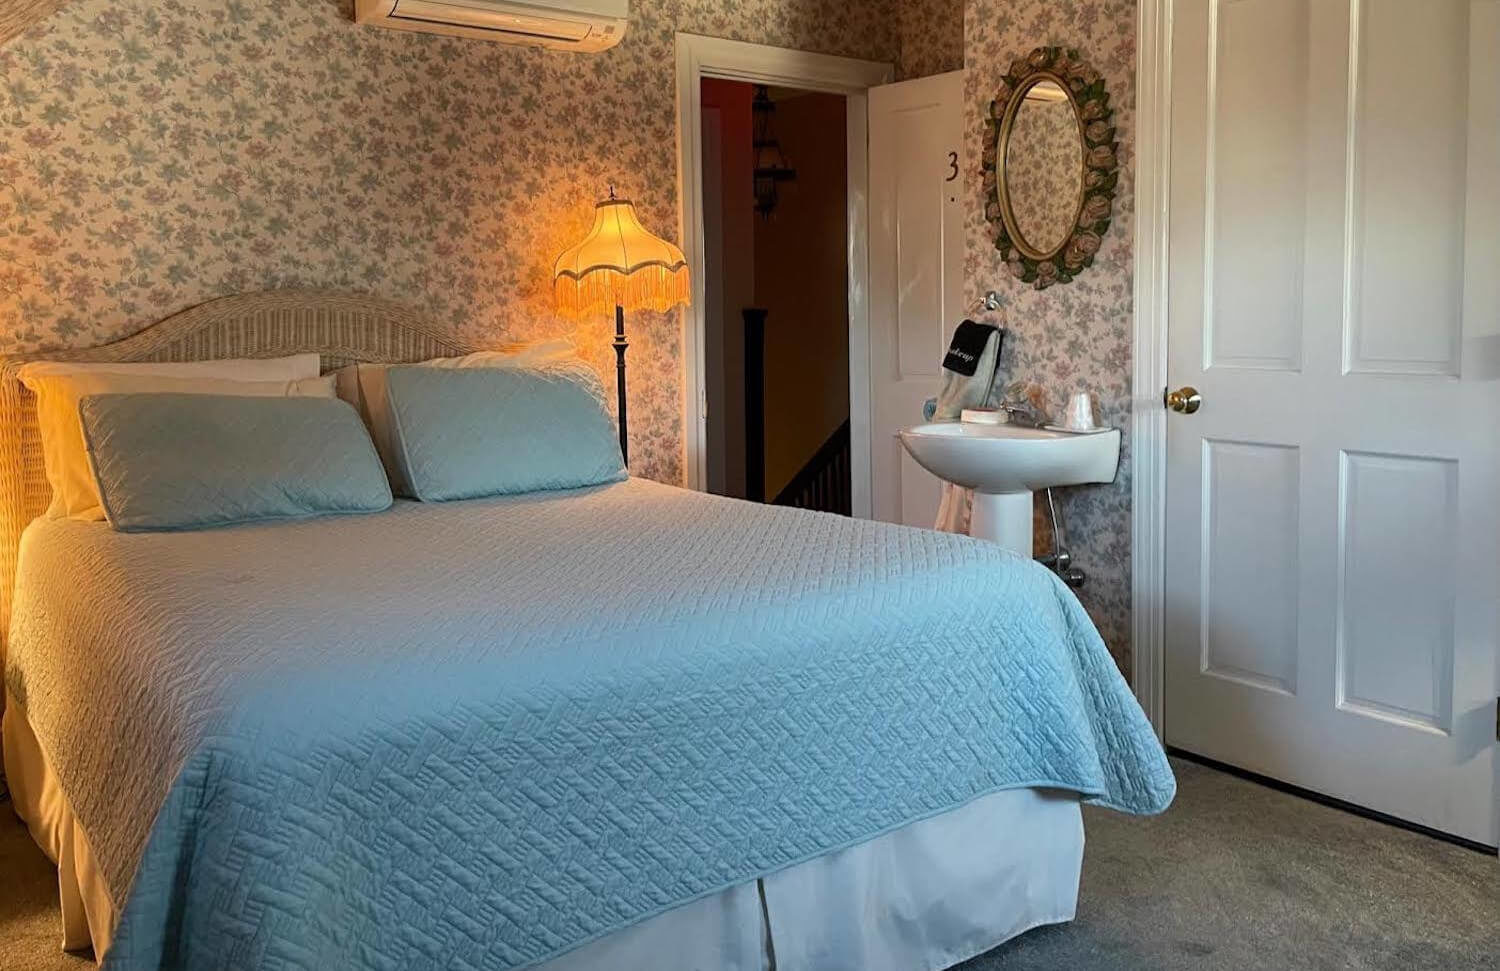 Queen bed with green quilt, white pedestal sink with oval mirror above, floor lamp, flowered wallpaper, air conditioner unit above bed